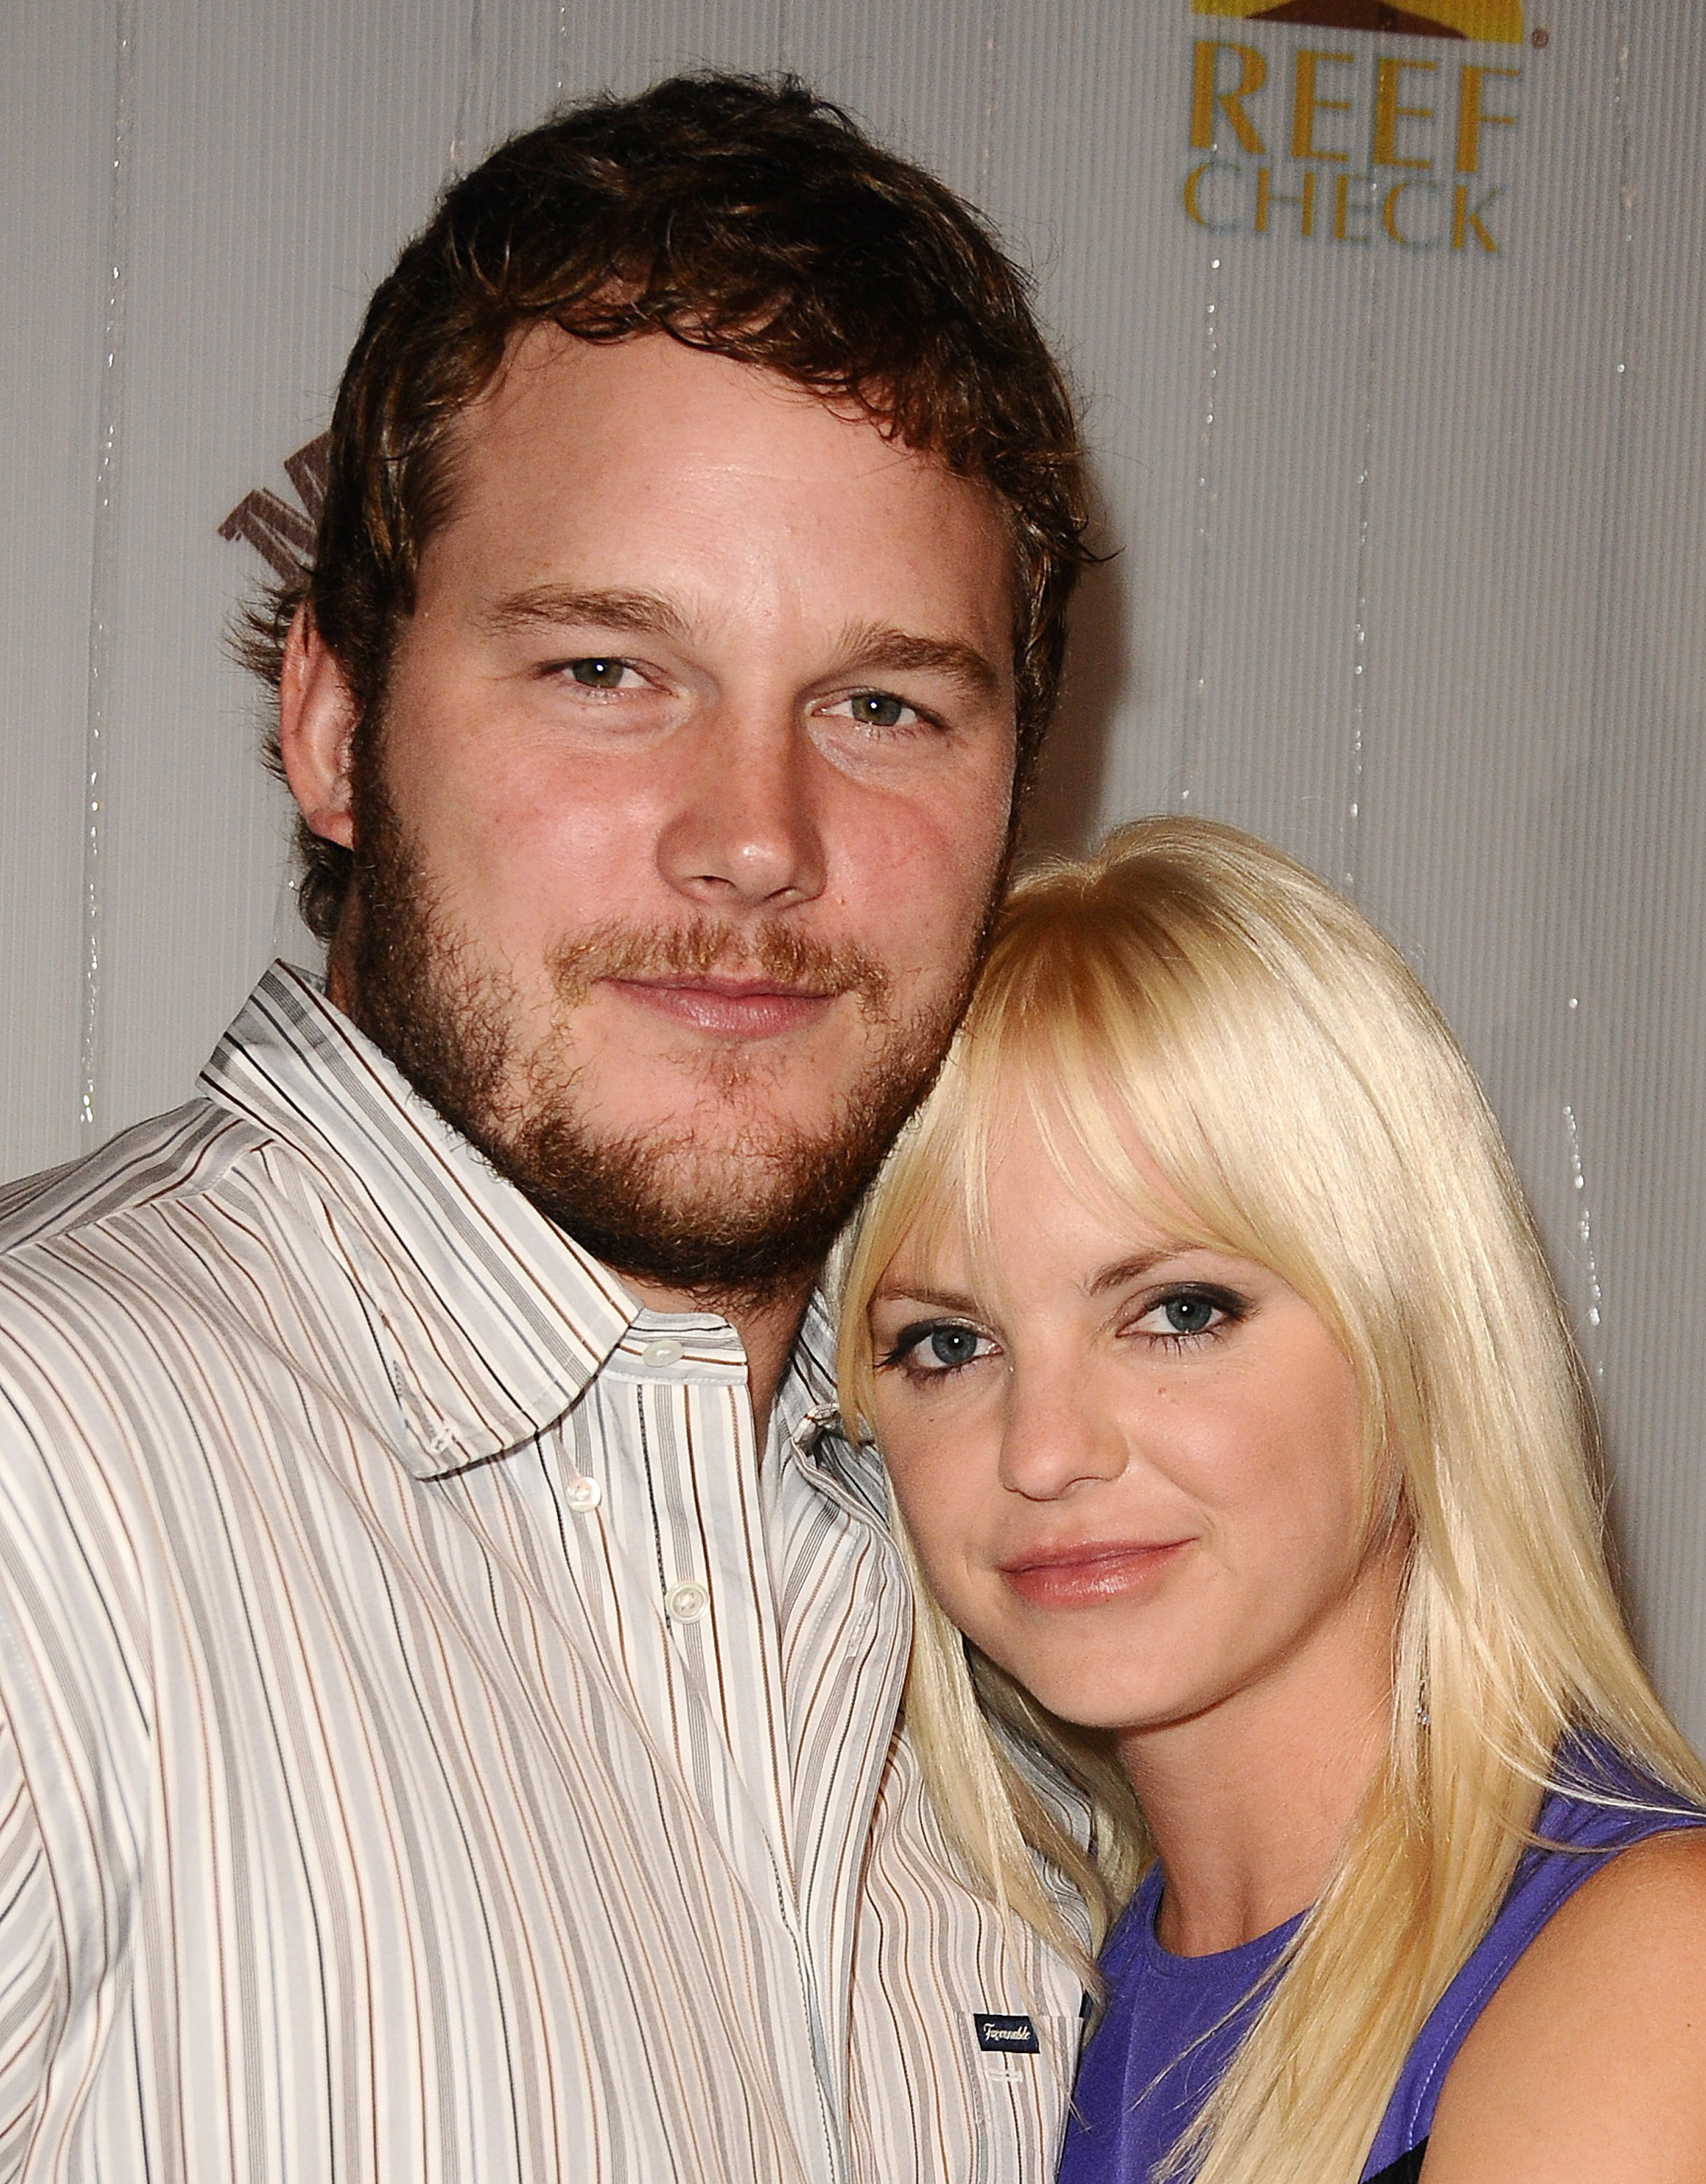 Actor Chris Pratt and Anna Faris at the Malibu and Reef Check Partnership summer pool party at Malibu Reef Check Estate on August 11, 2009 in Beverly Hills, California. | Source: Getty Images